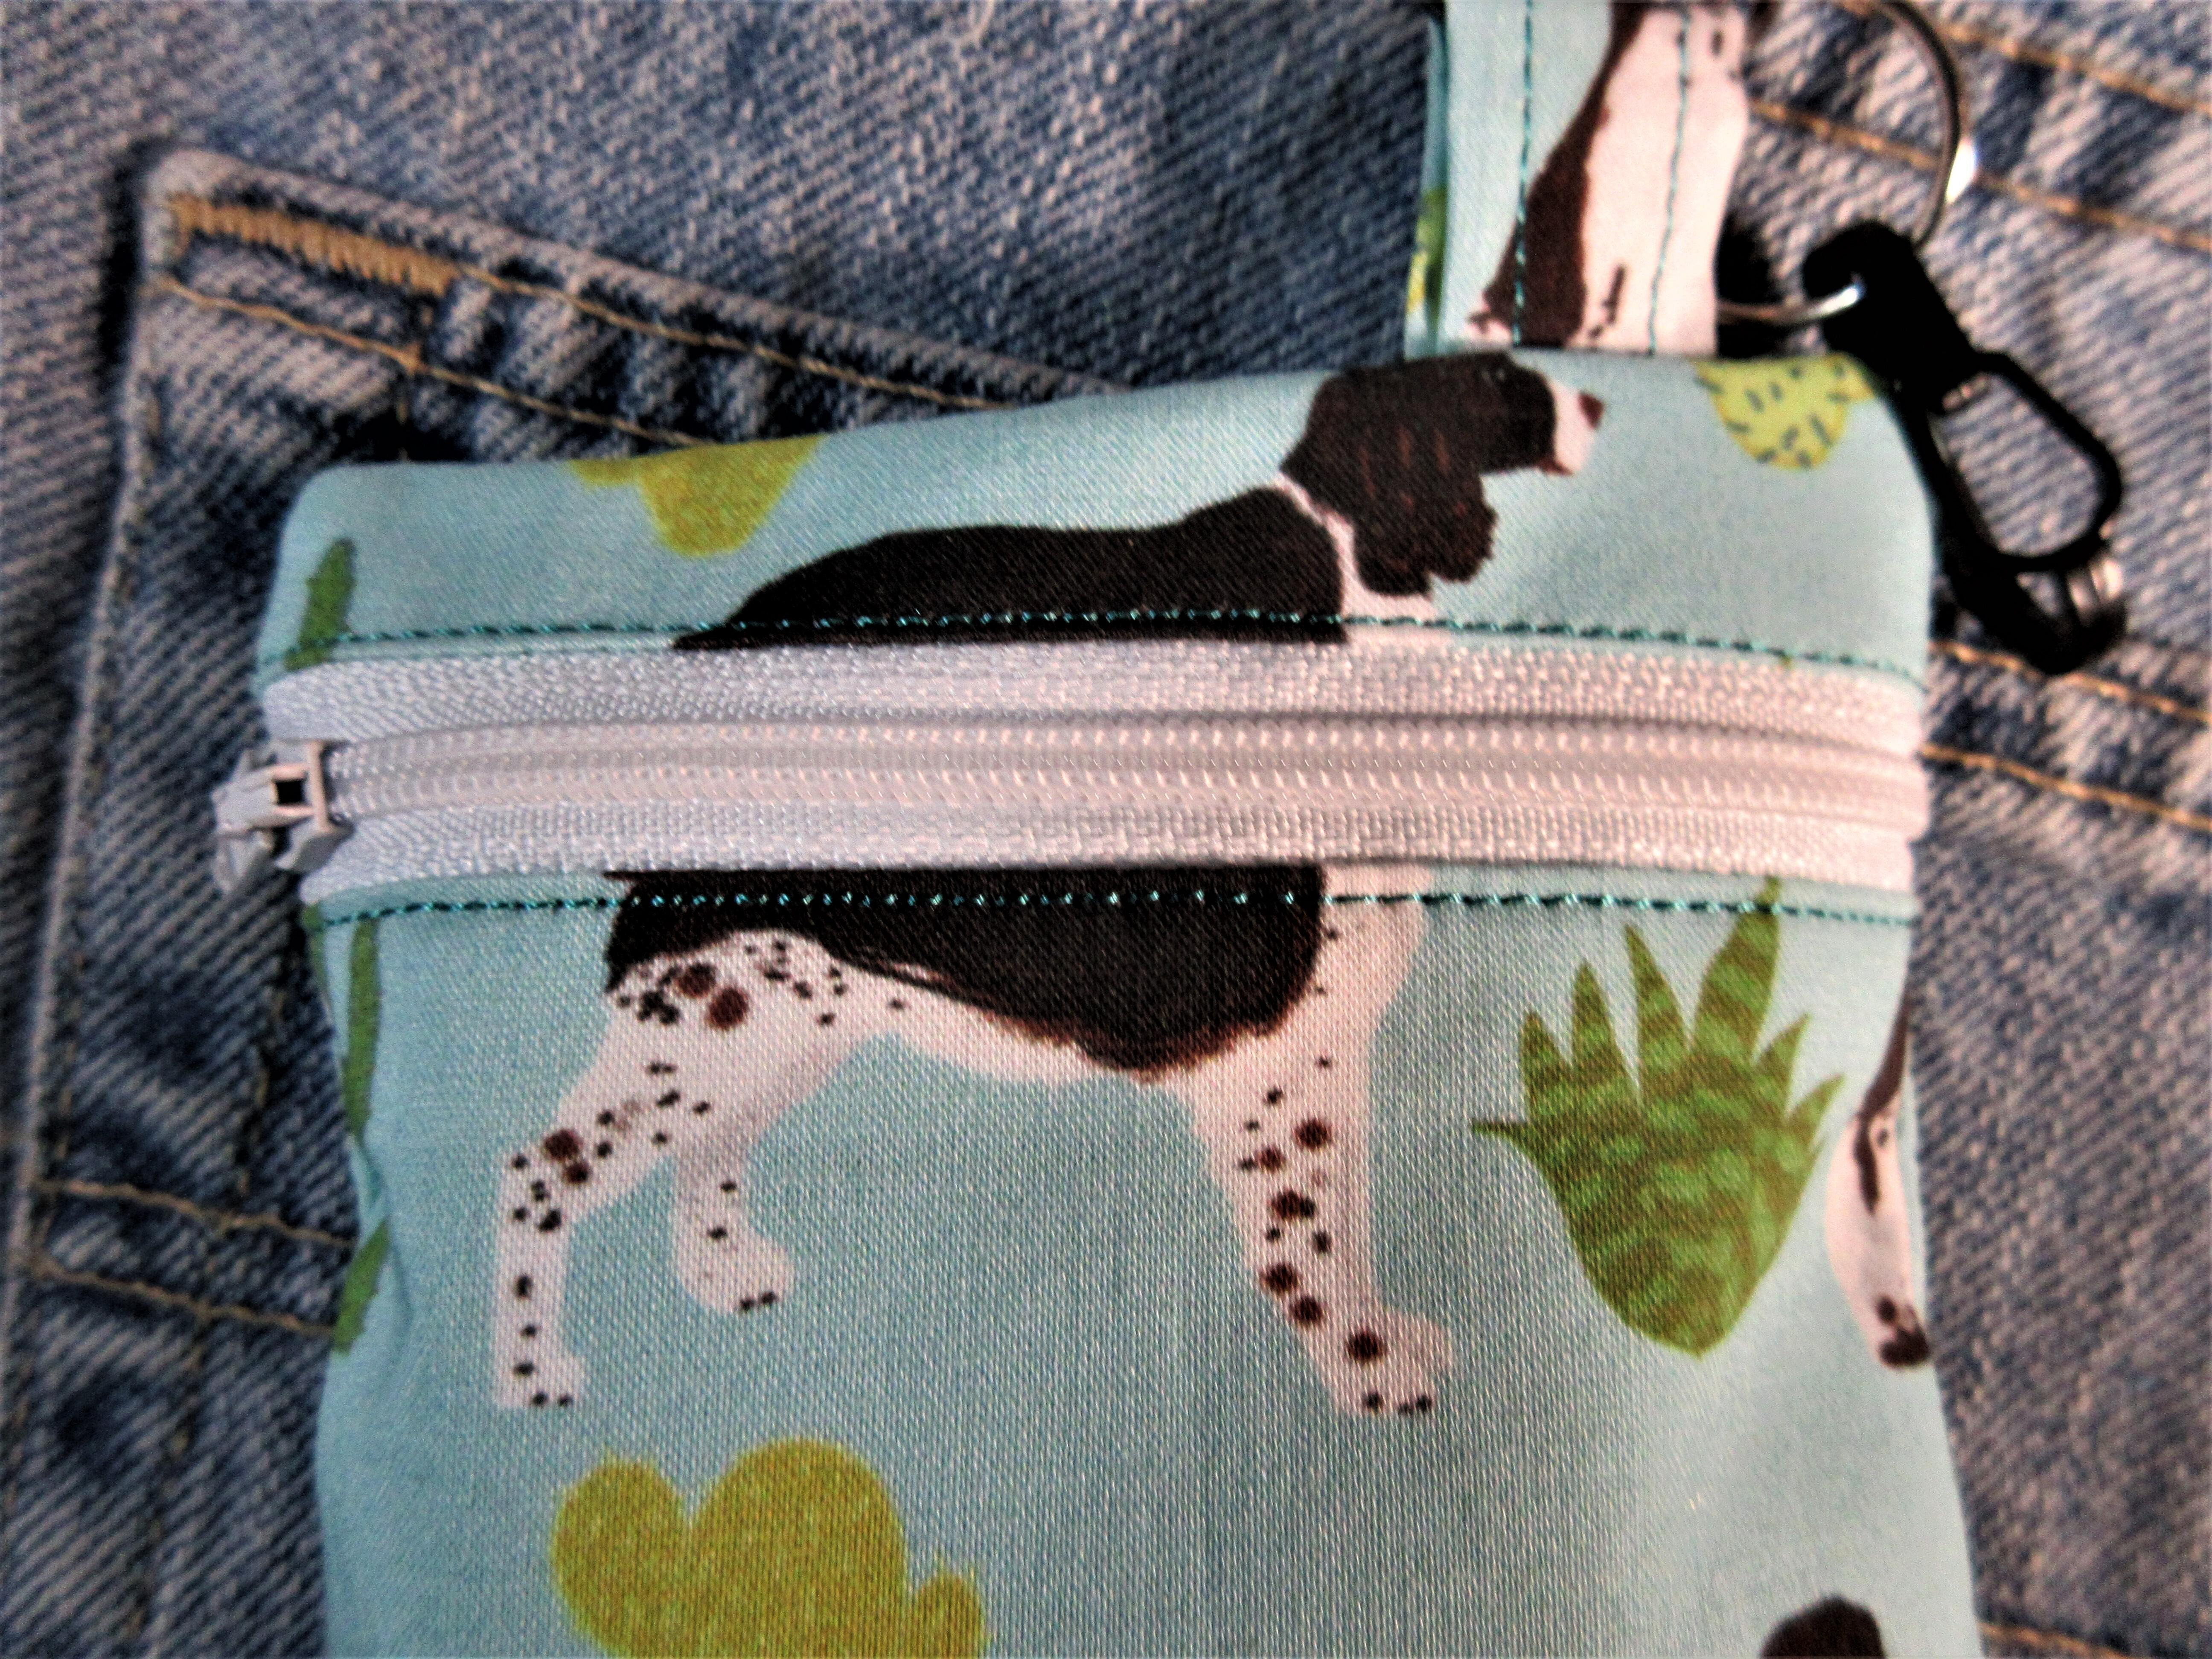 Cavalier King Charles Spaniel Multi purpose pouch Handmade by a Fur Baby Favorite dog poop bag holder waste bag dispenser training treat pouch binky pacifier bag change purse pouch